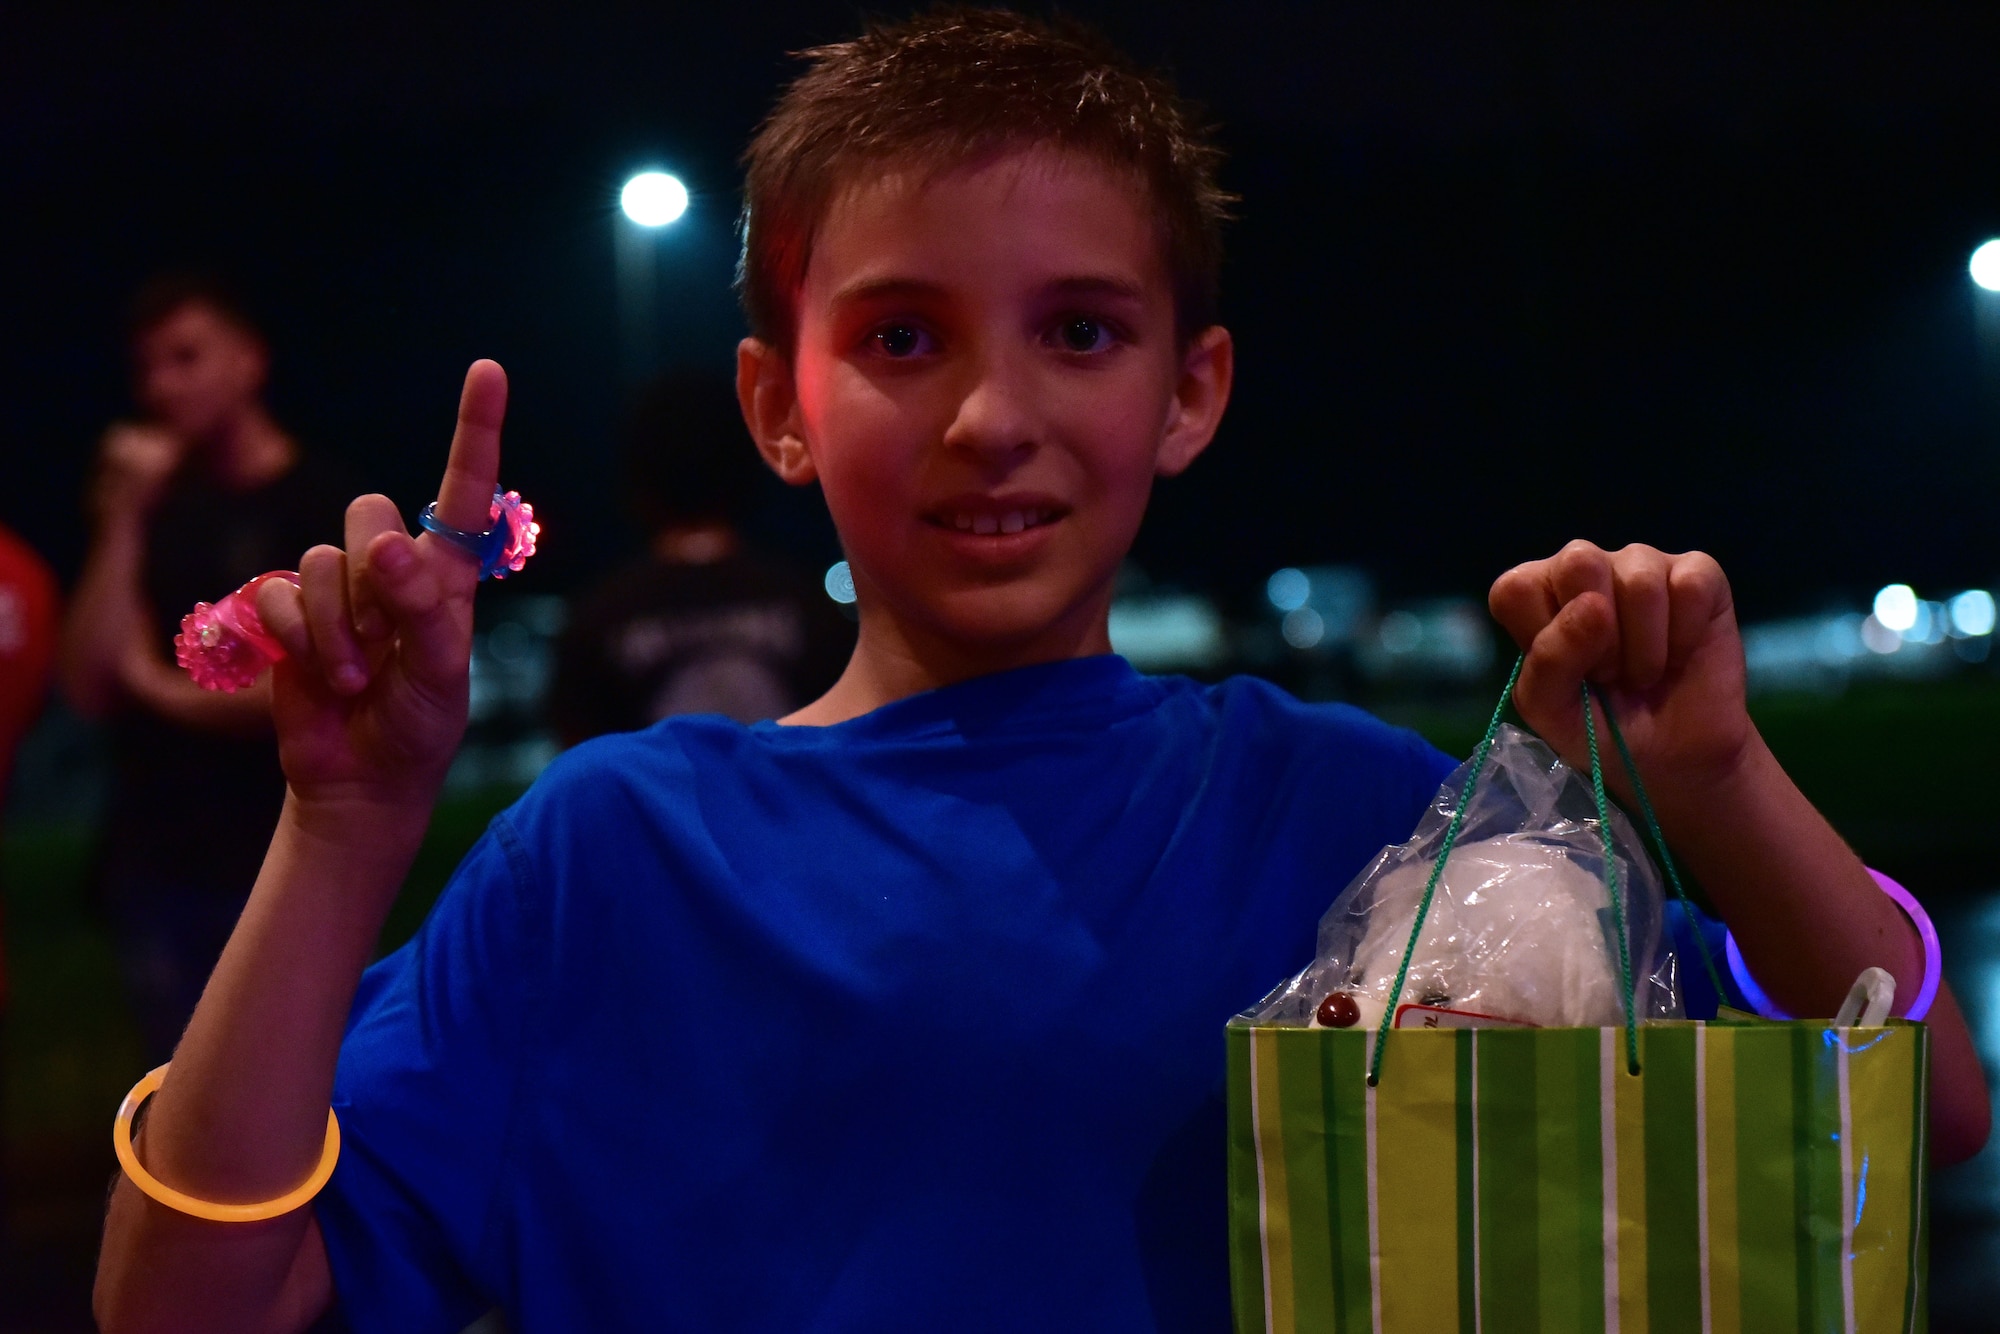 Child holds up index finger and prize bag as he smiles at the camera.